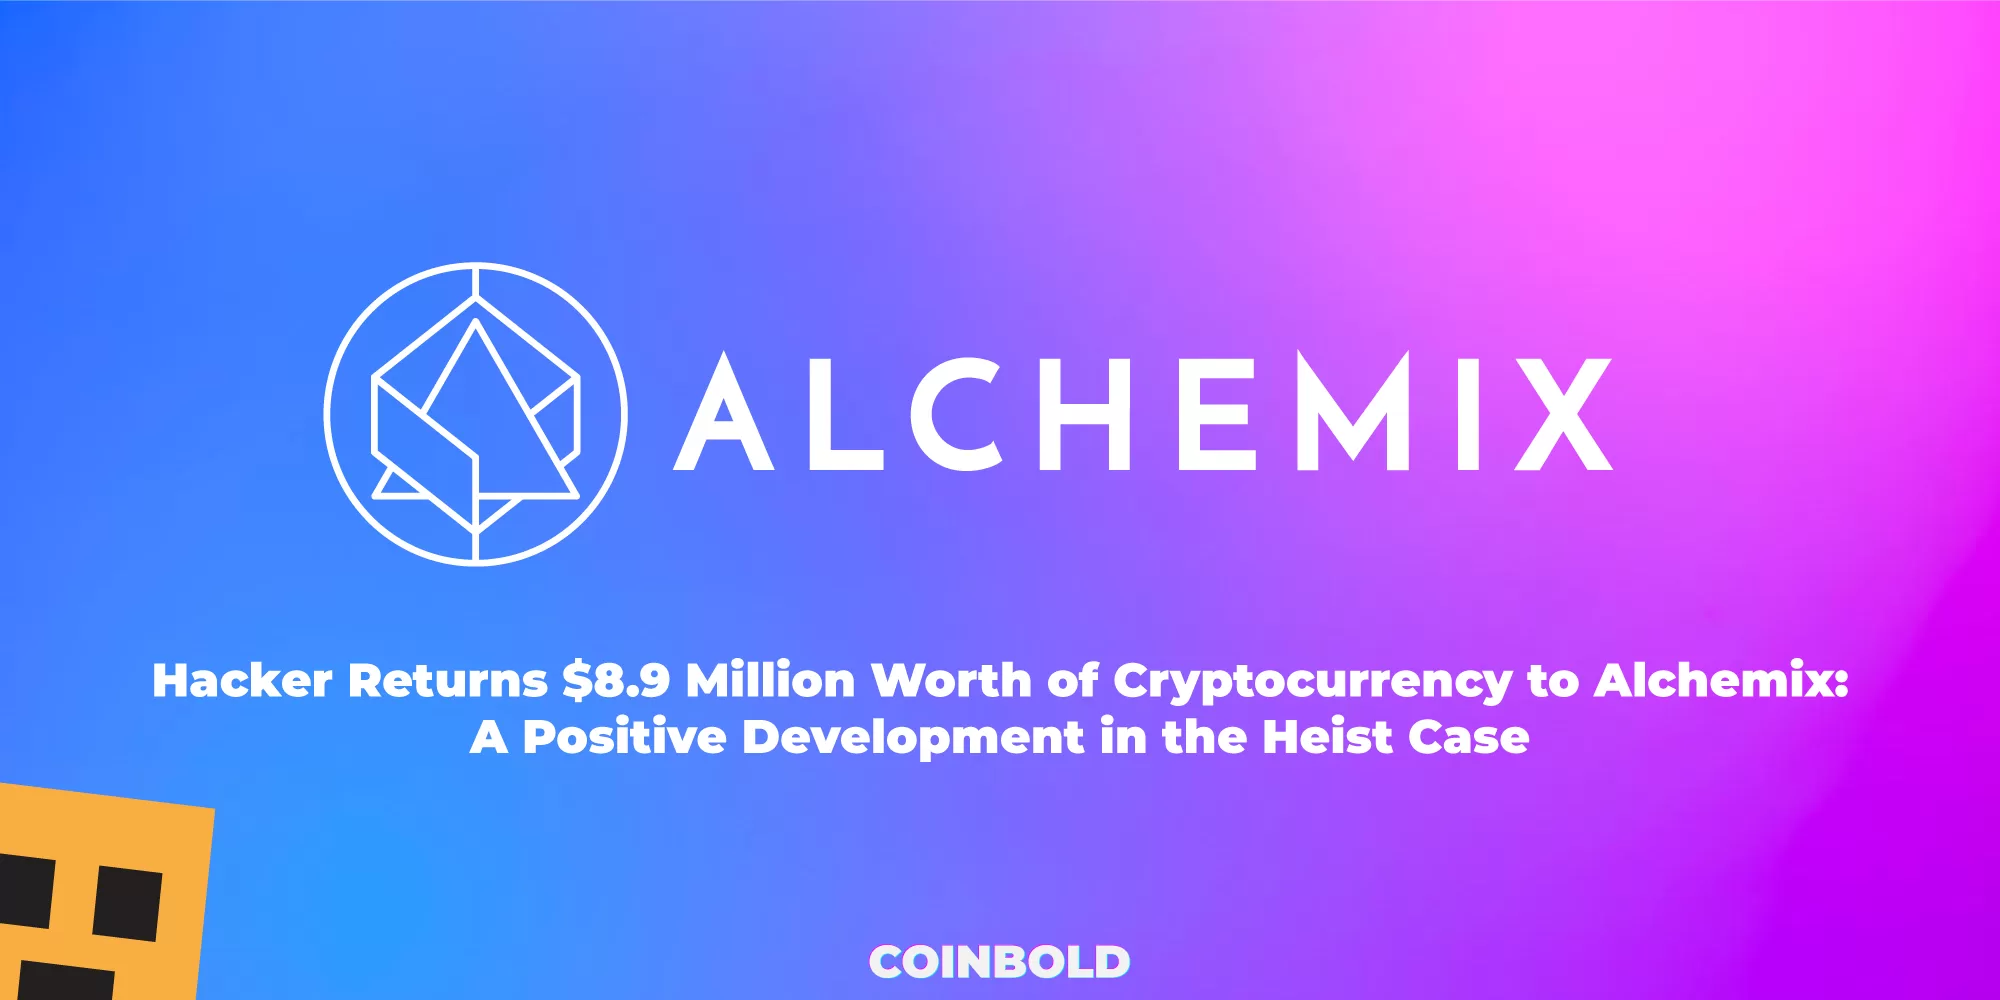 Hacker Returns $8.9 Million Worth of Cryptocurrency to Alchemix A Positive Development in the Heist Case